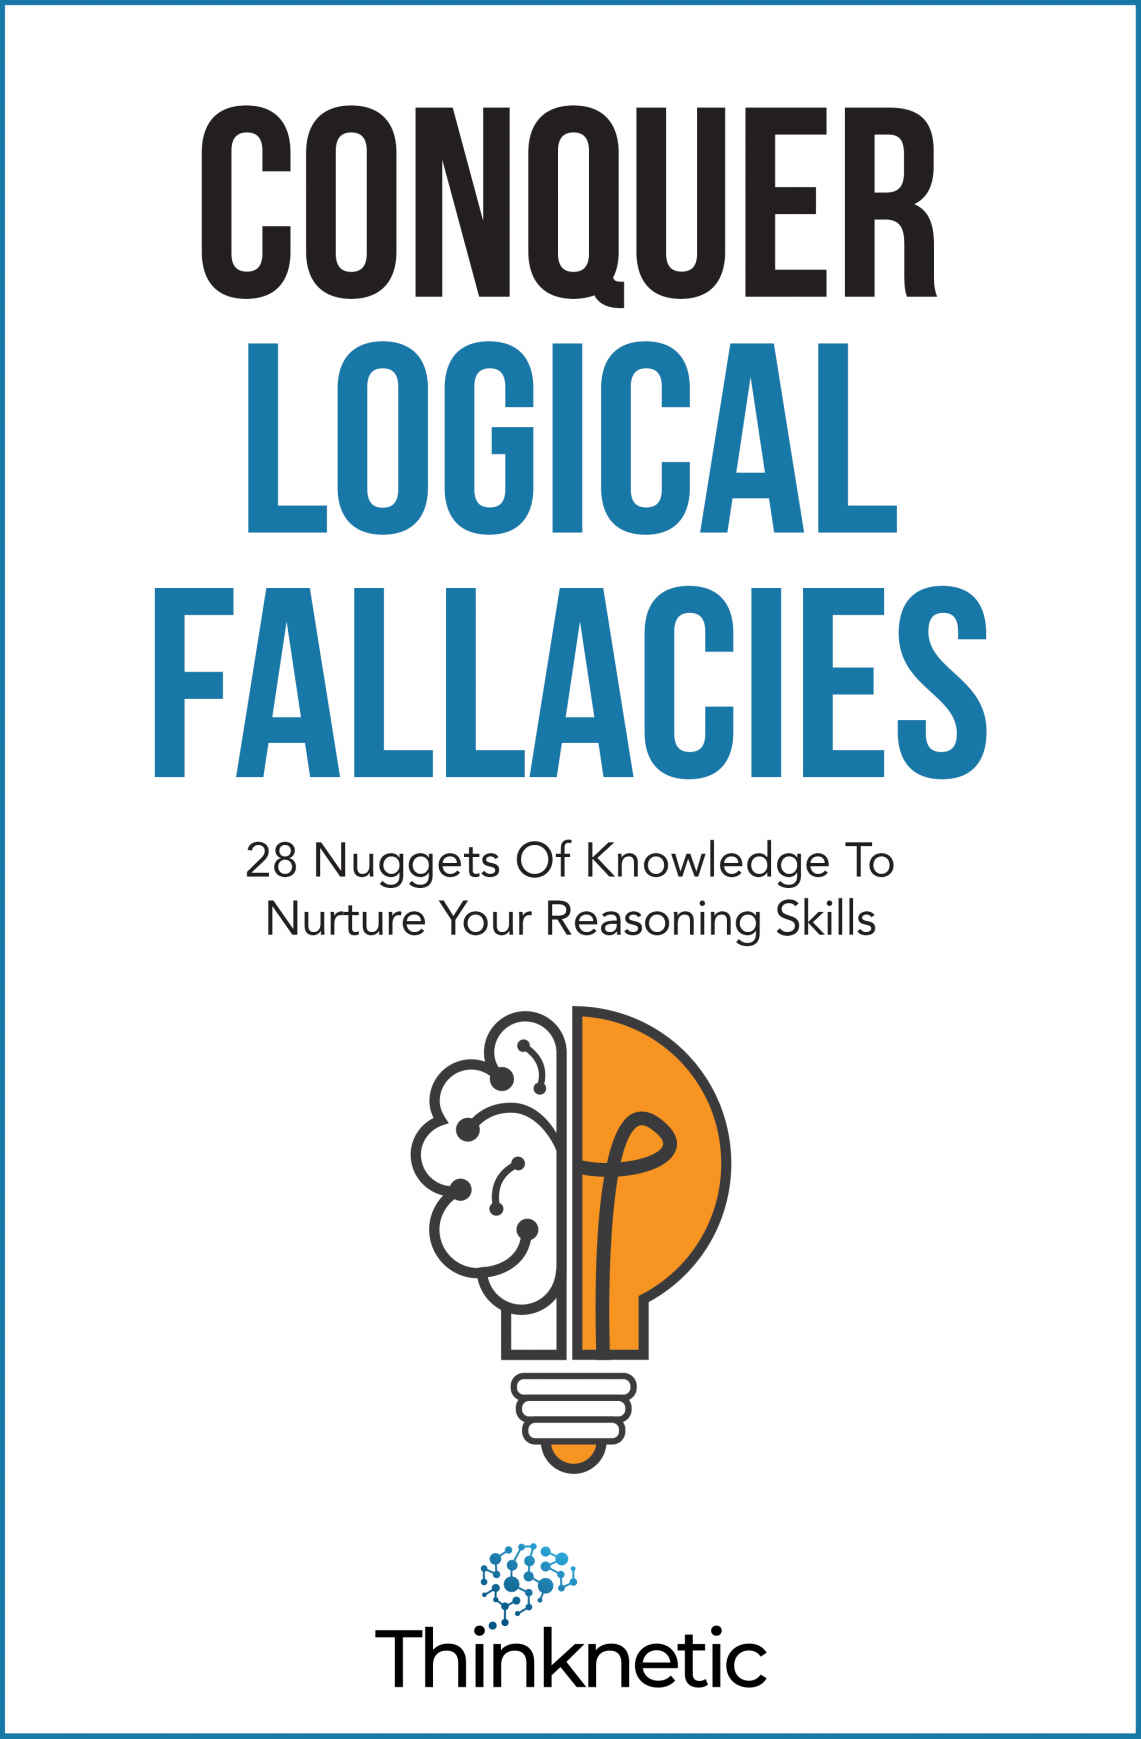 Conquer Logical Fallacies: 28 Nuggets of Knowledge to Nurture Your Reasoning Skills